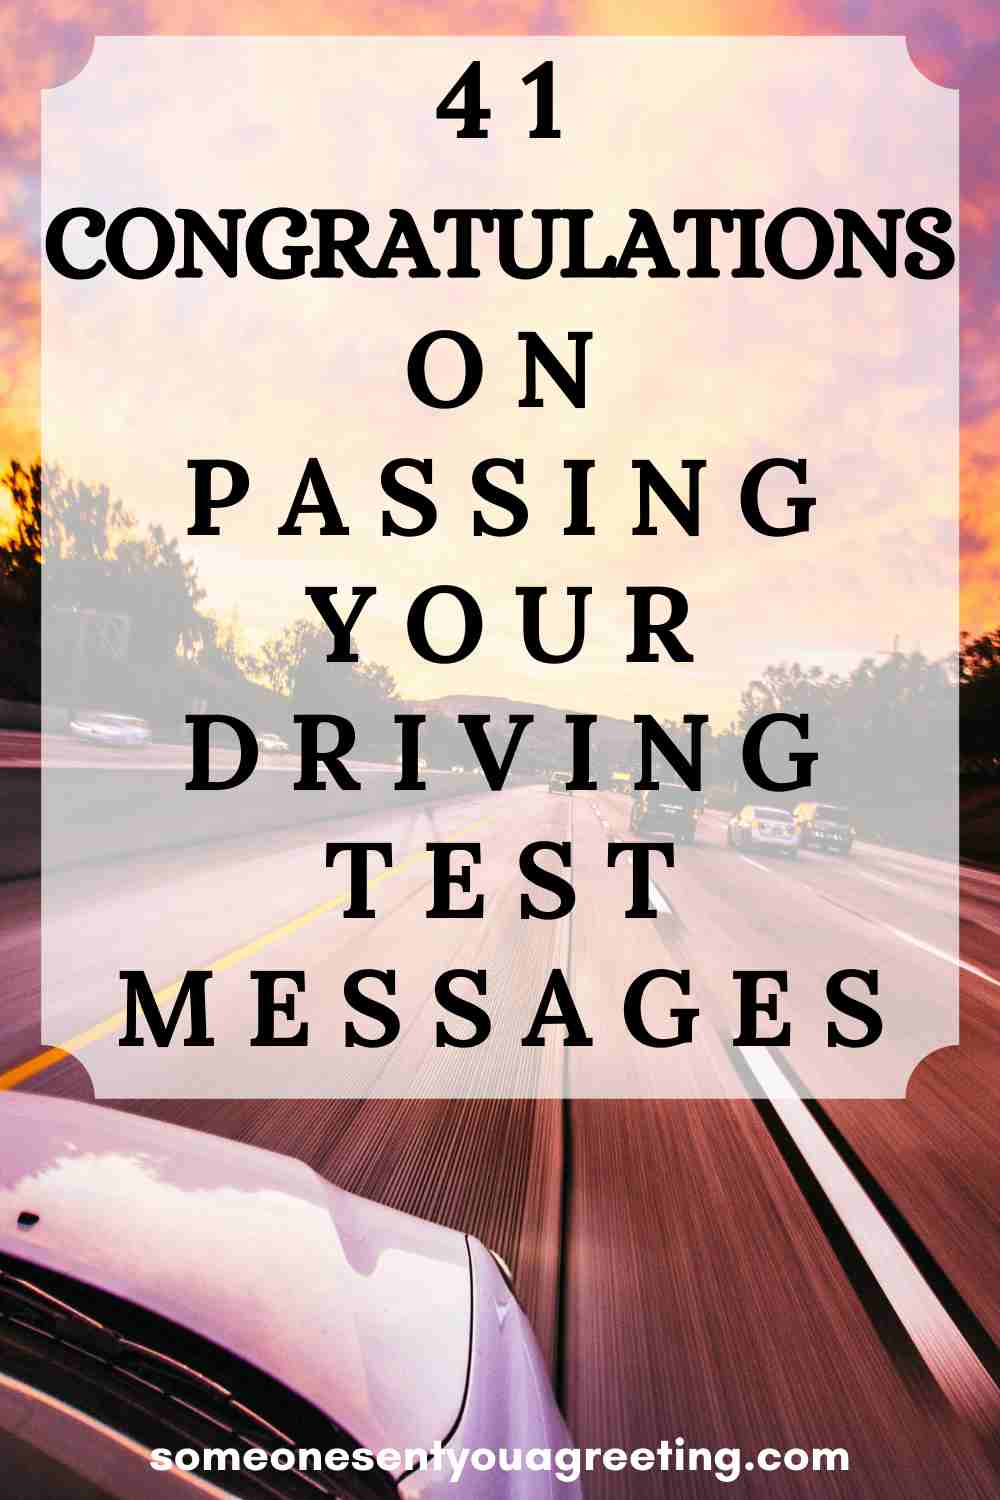 congratulations on passing your driving test messages